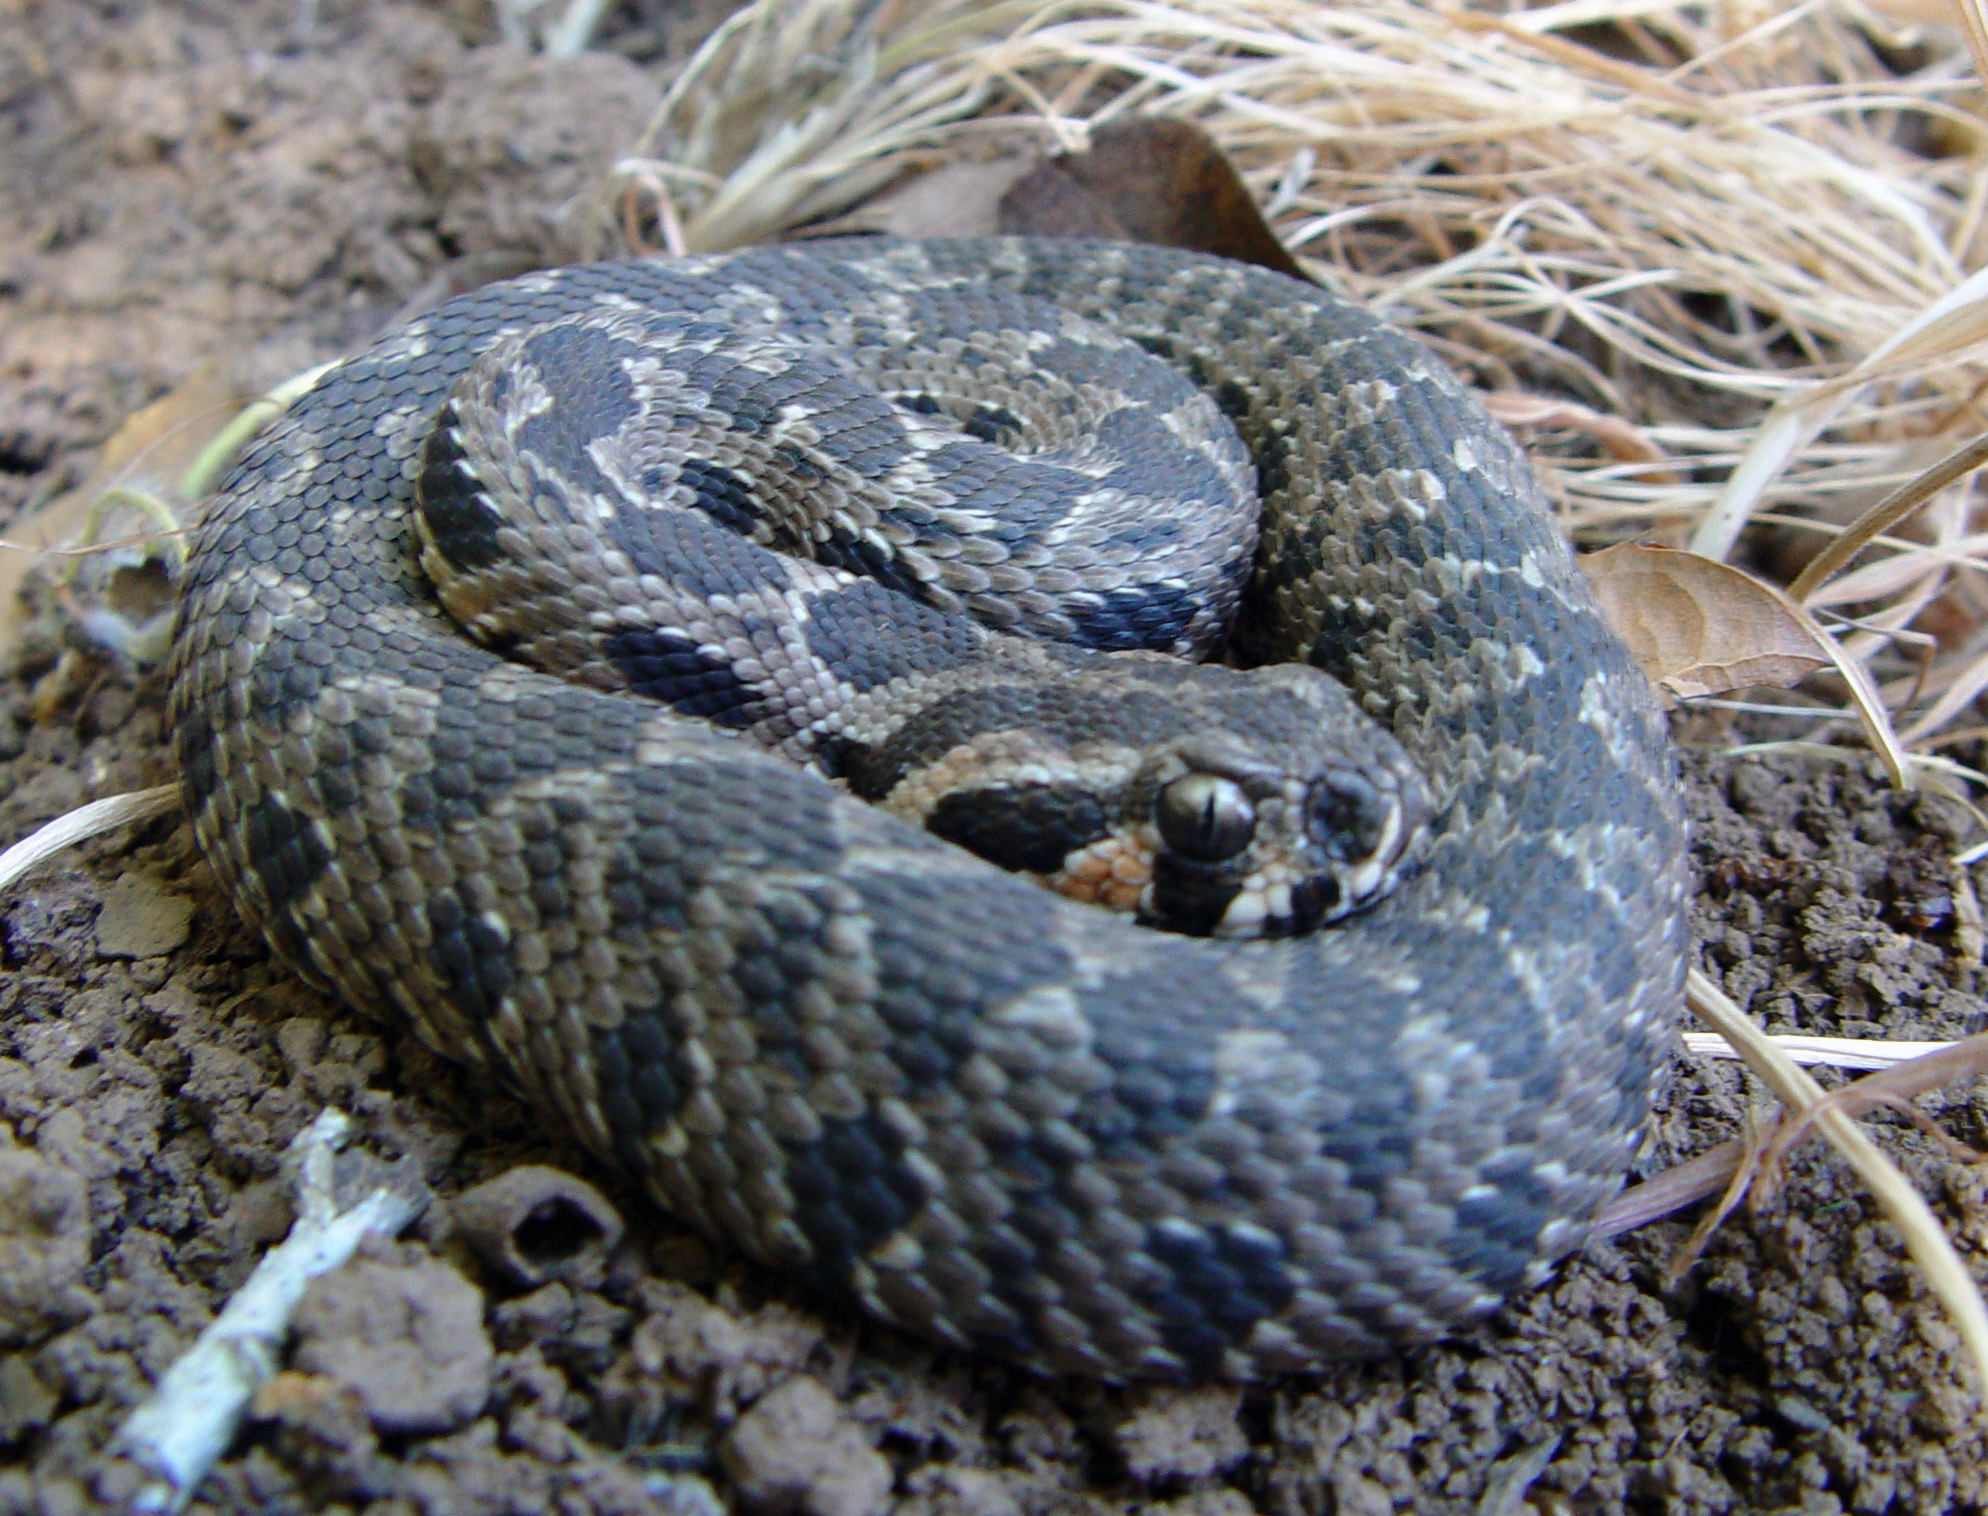 A curled up Israeli viper. Photo: Guy Himovich, from Wikipedia